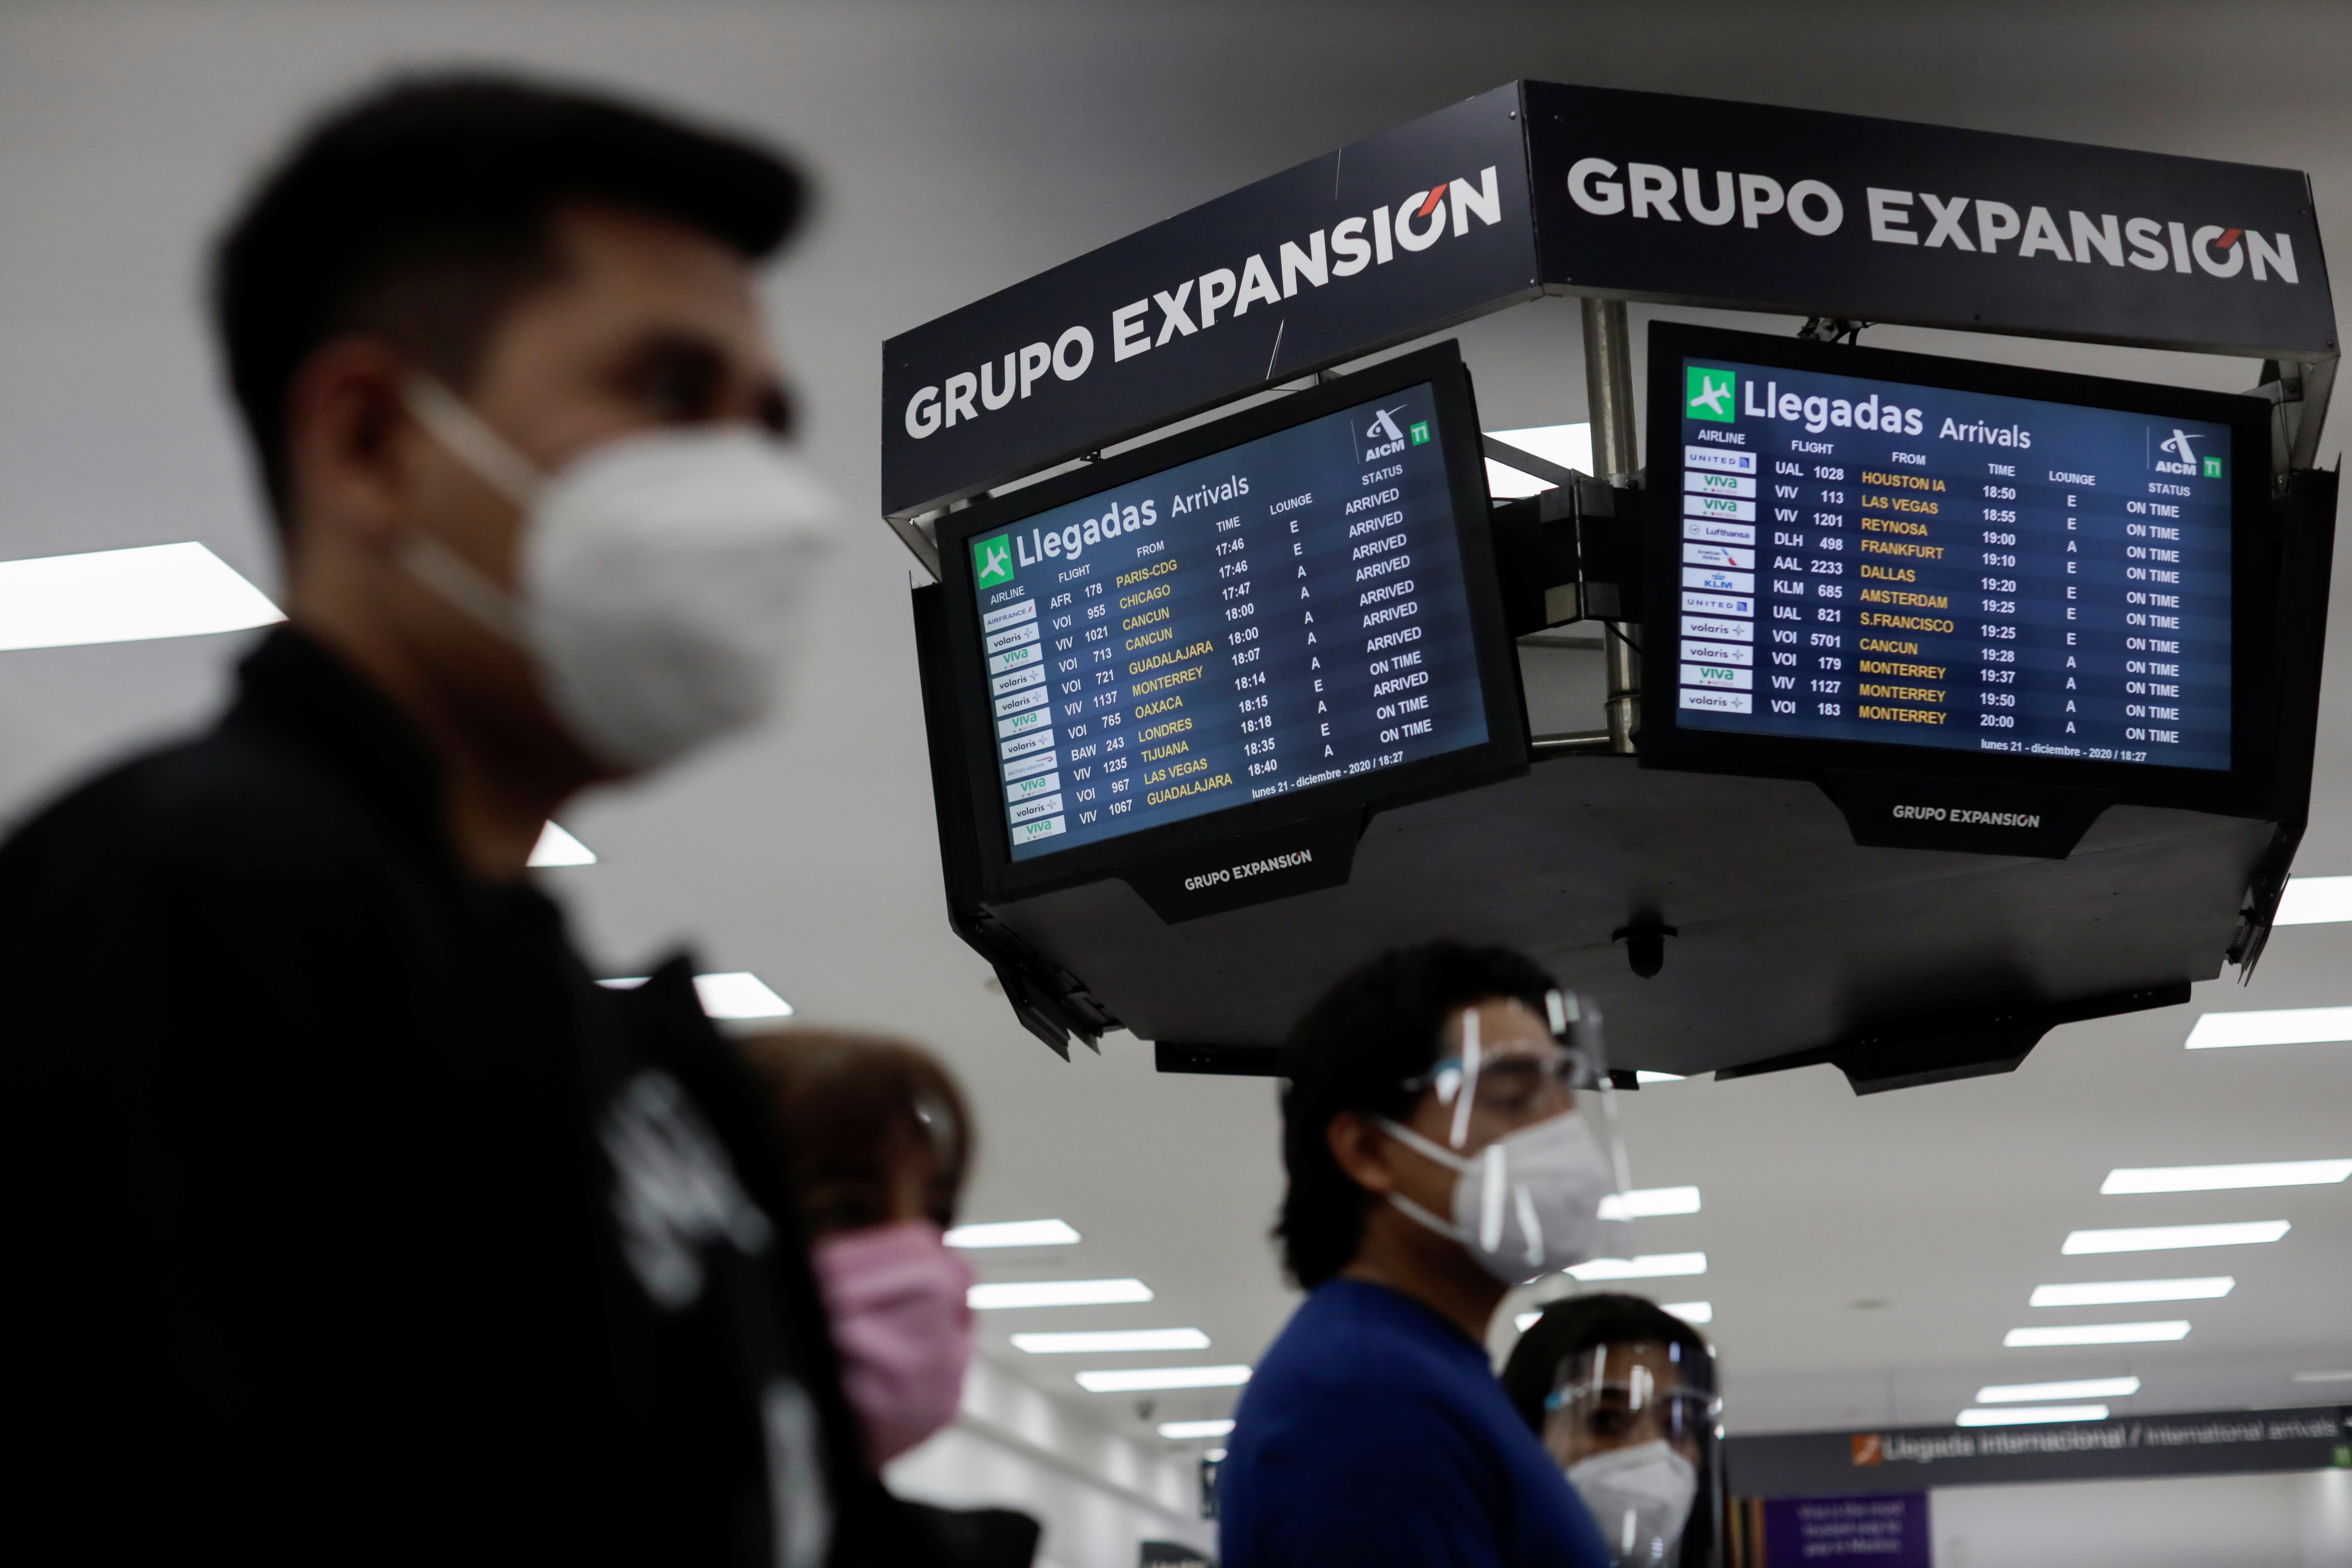 A flight information screen displays the arrivals and delayed flights, including the one from London, as the Mexico's government analyses to suspend flights from the U.K. due to fears about a highly infectious new coronavirus strain amid the coronavirus disease (COVID-19) outbreak, at the Benito Juarez International Airport, in Mexico City, Mexico December 21, 2020. REUTERS/Luis Cortes